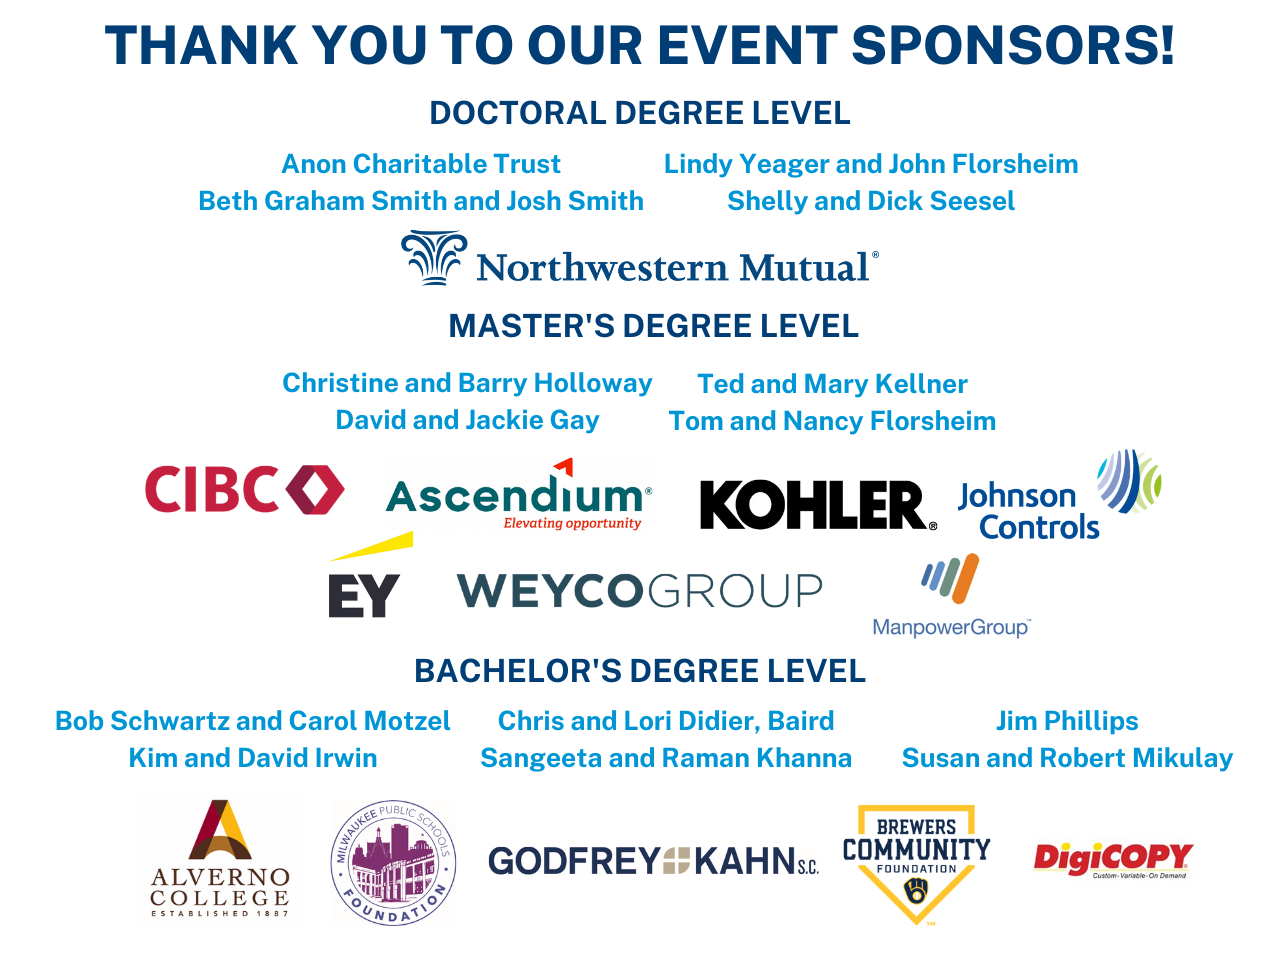 Text: Thank you to our event sponsors Photo of companies logos at different degree levels